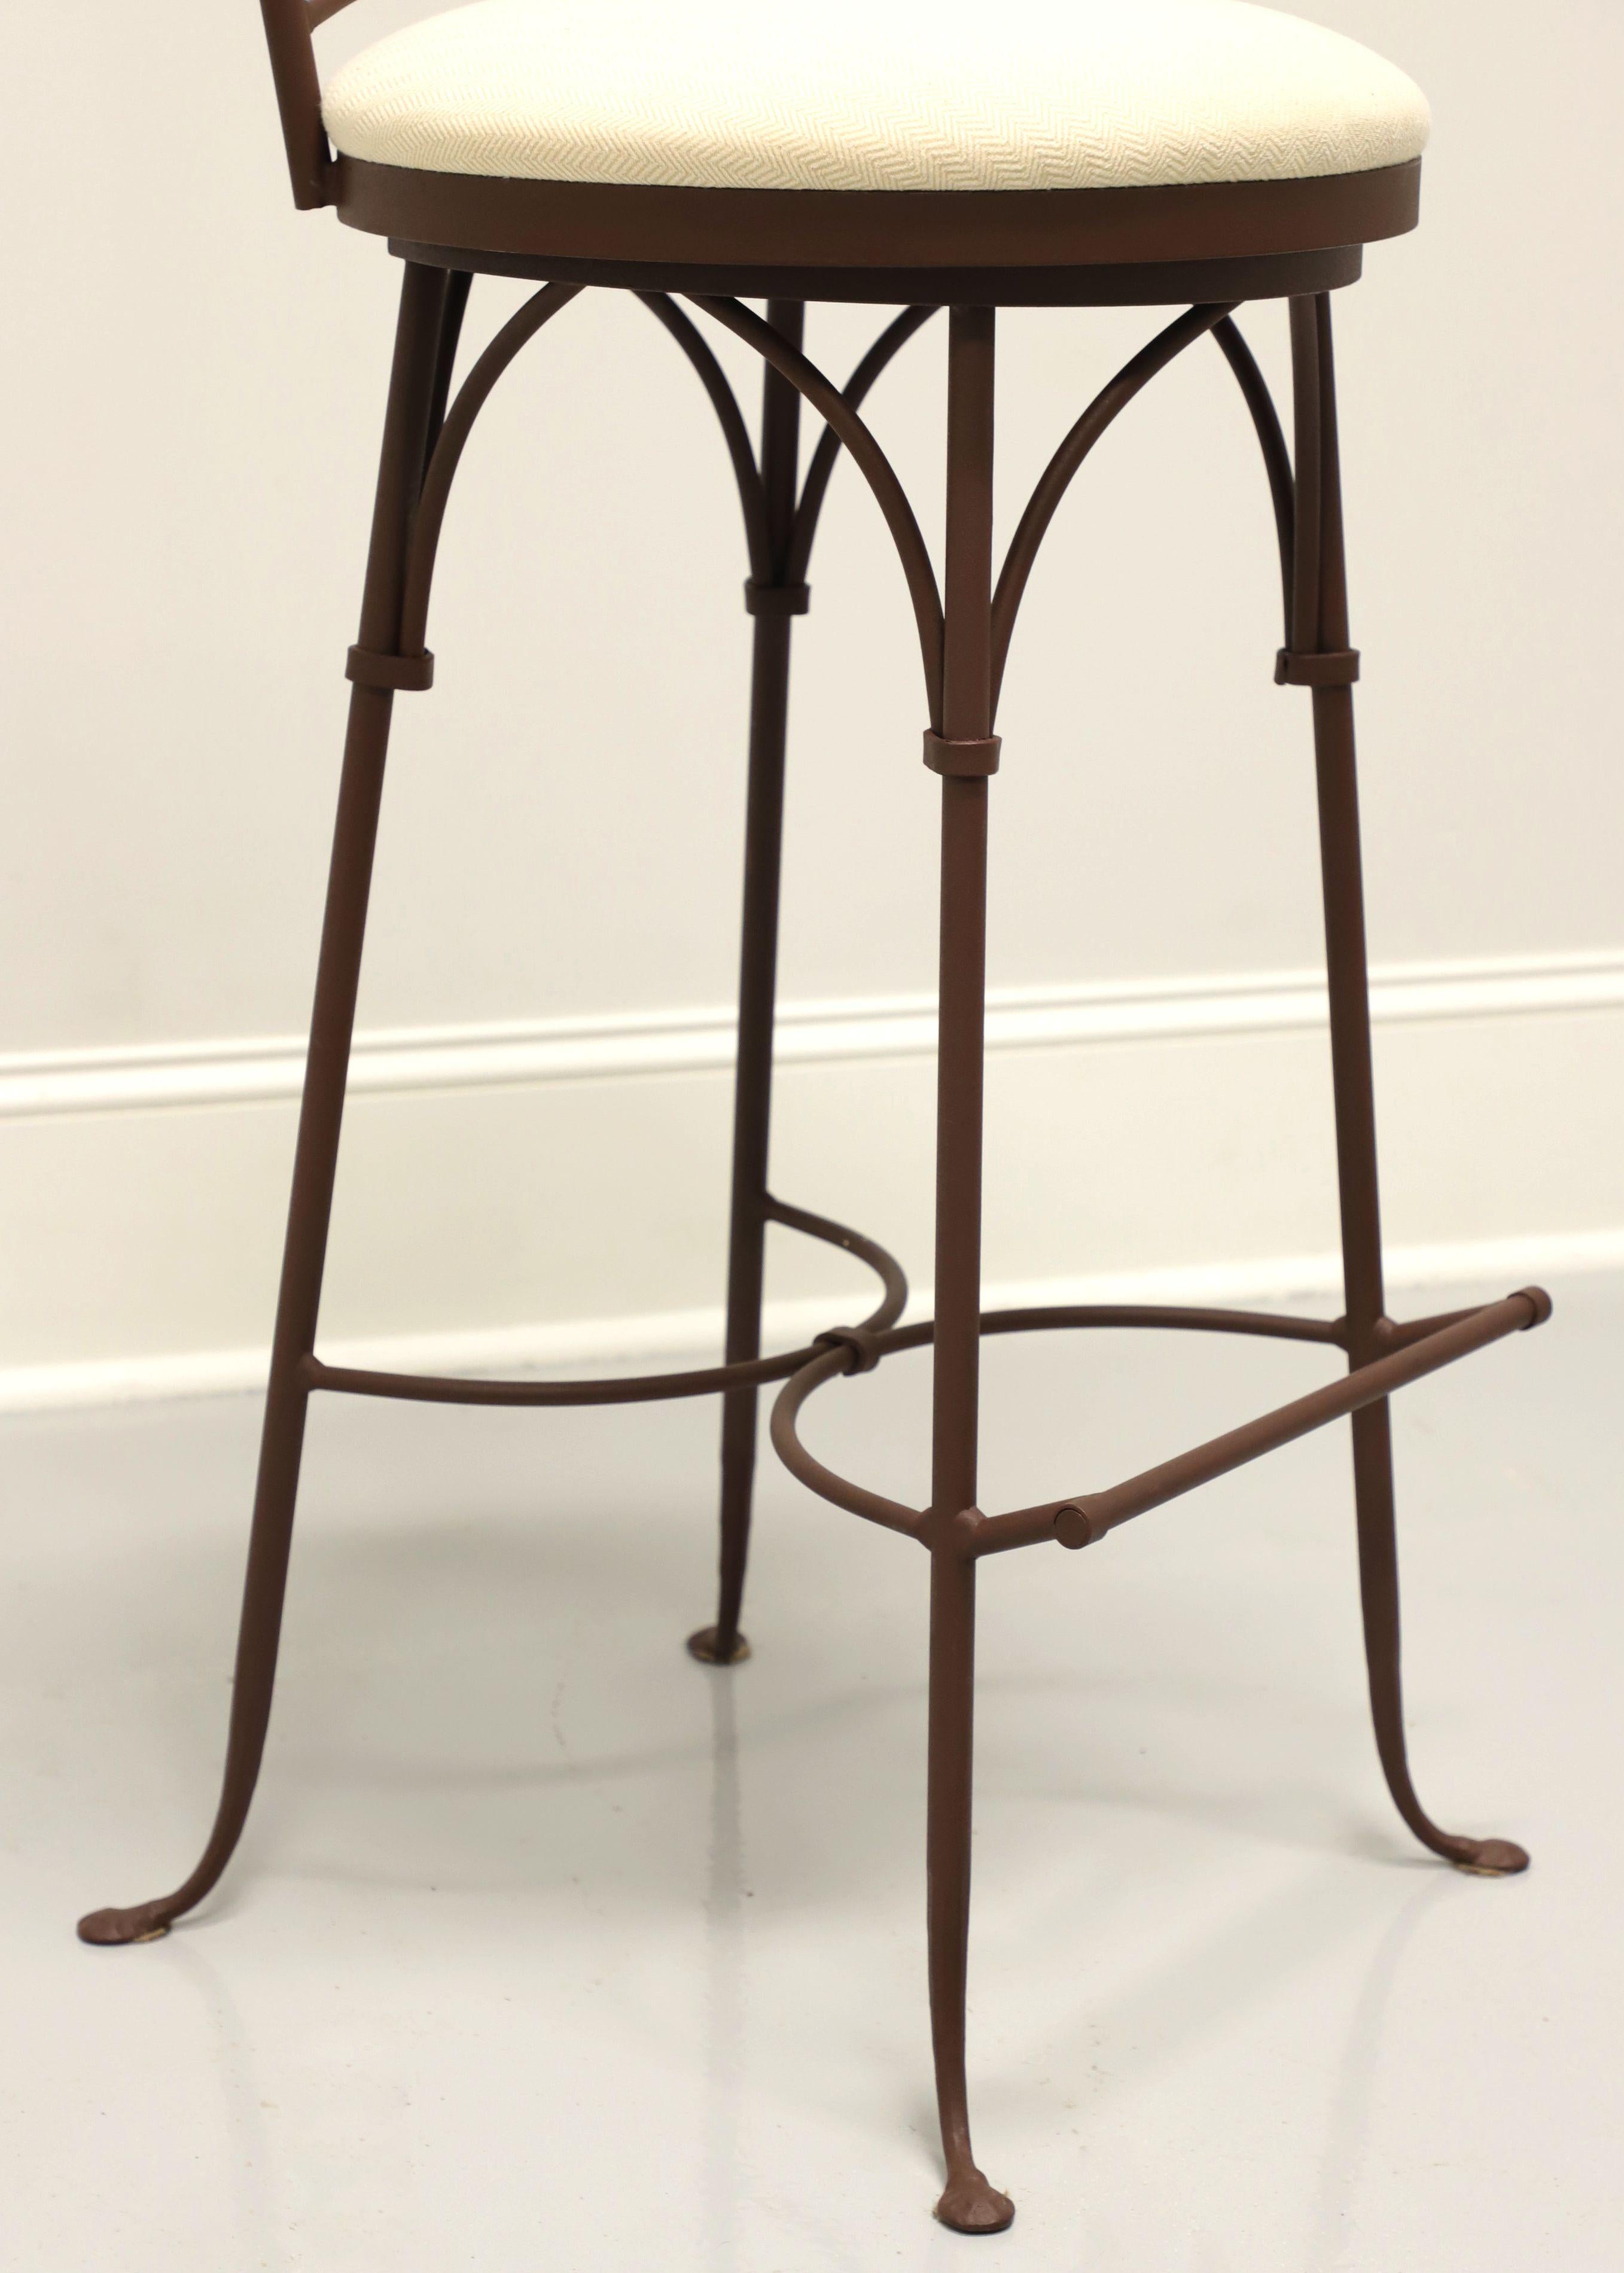 CHARLESTON FORGE Wrought Iron Shaker Arch Bar Height Swivel Stools - Pair A In Good Condition In Charlotte, NC